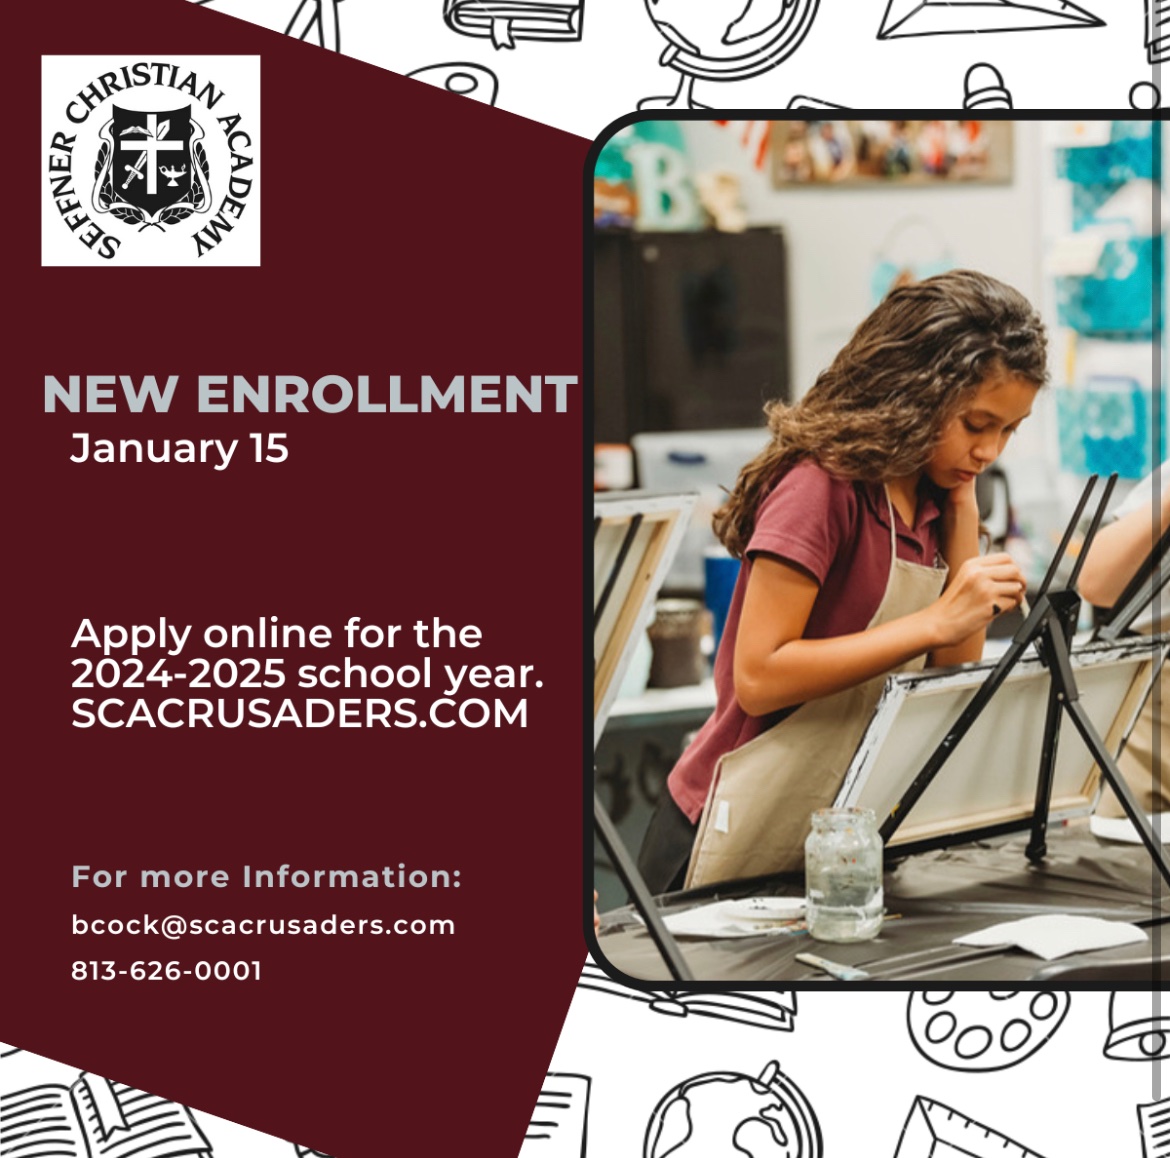 We are already planning for the 2024-2025 school year. Our online application process for new students will open on January 15, 2024. Apply at SCACRUSADERS.COM